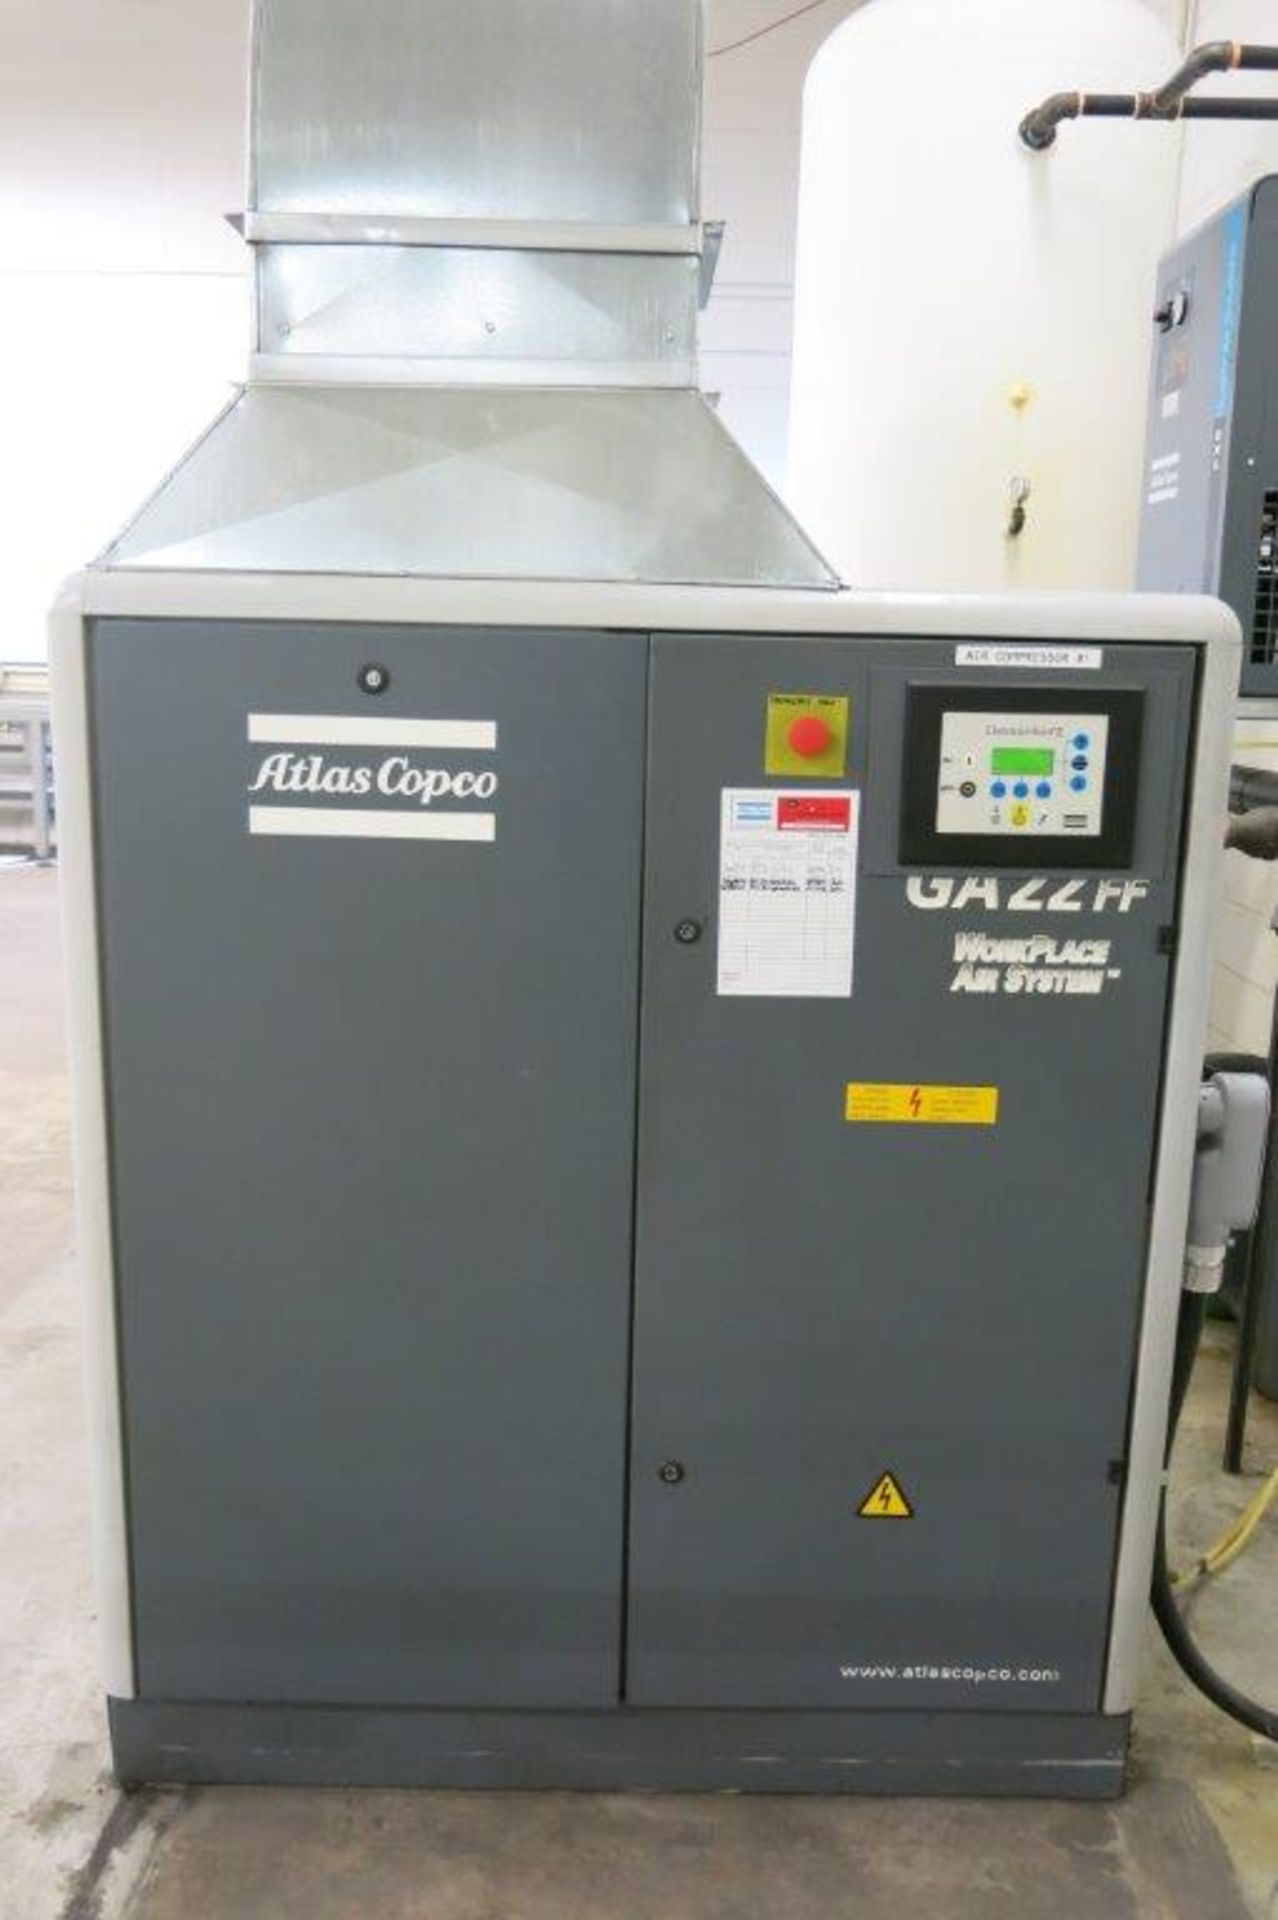 ATLAS COPCO, GA22, 30 HP, ROTARY SCREW AIR COMPRESSOR, 2001, S/N AII 261399, (RIGGER REQUIRED)